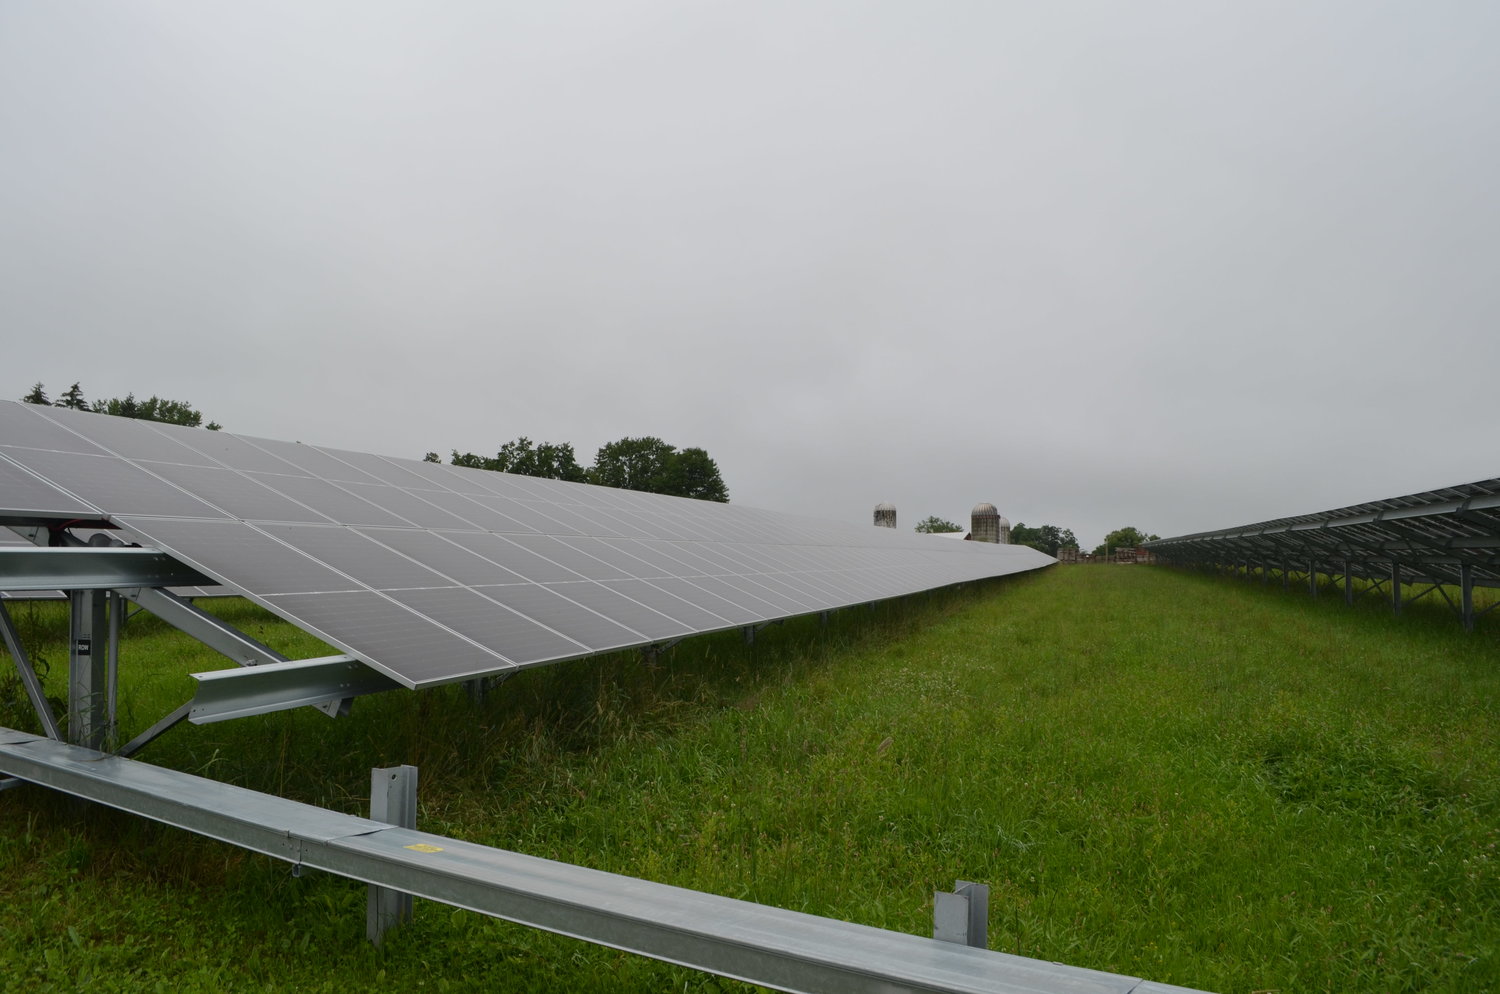 A field of solar panels on farmland in the town of Bethel.